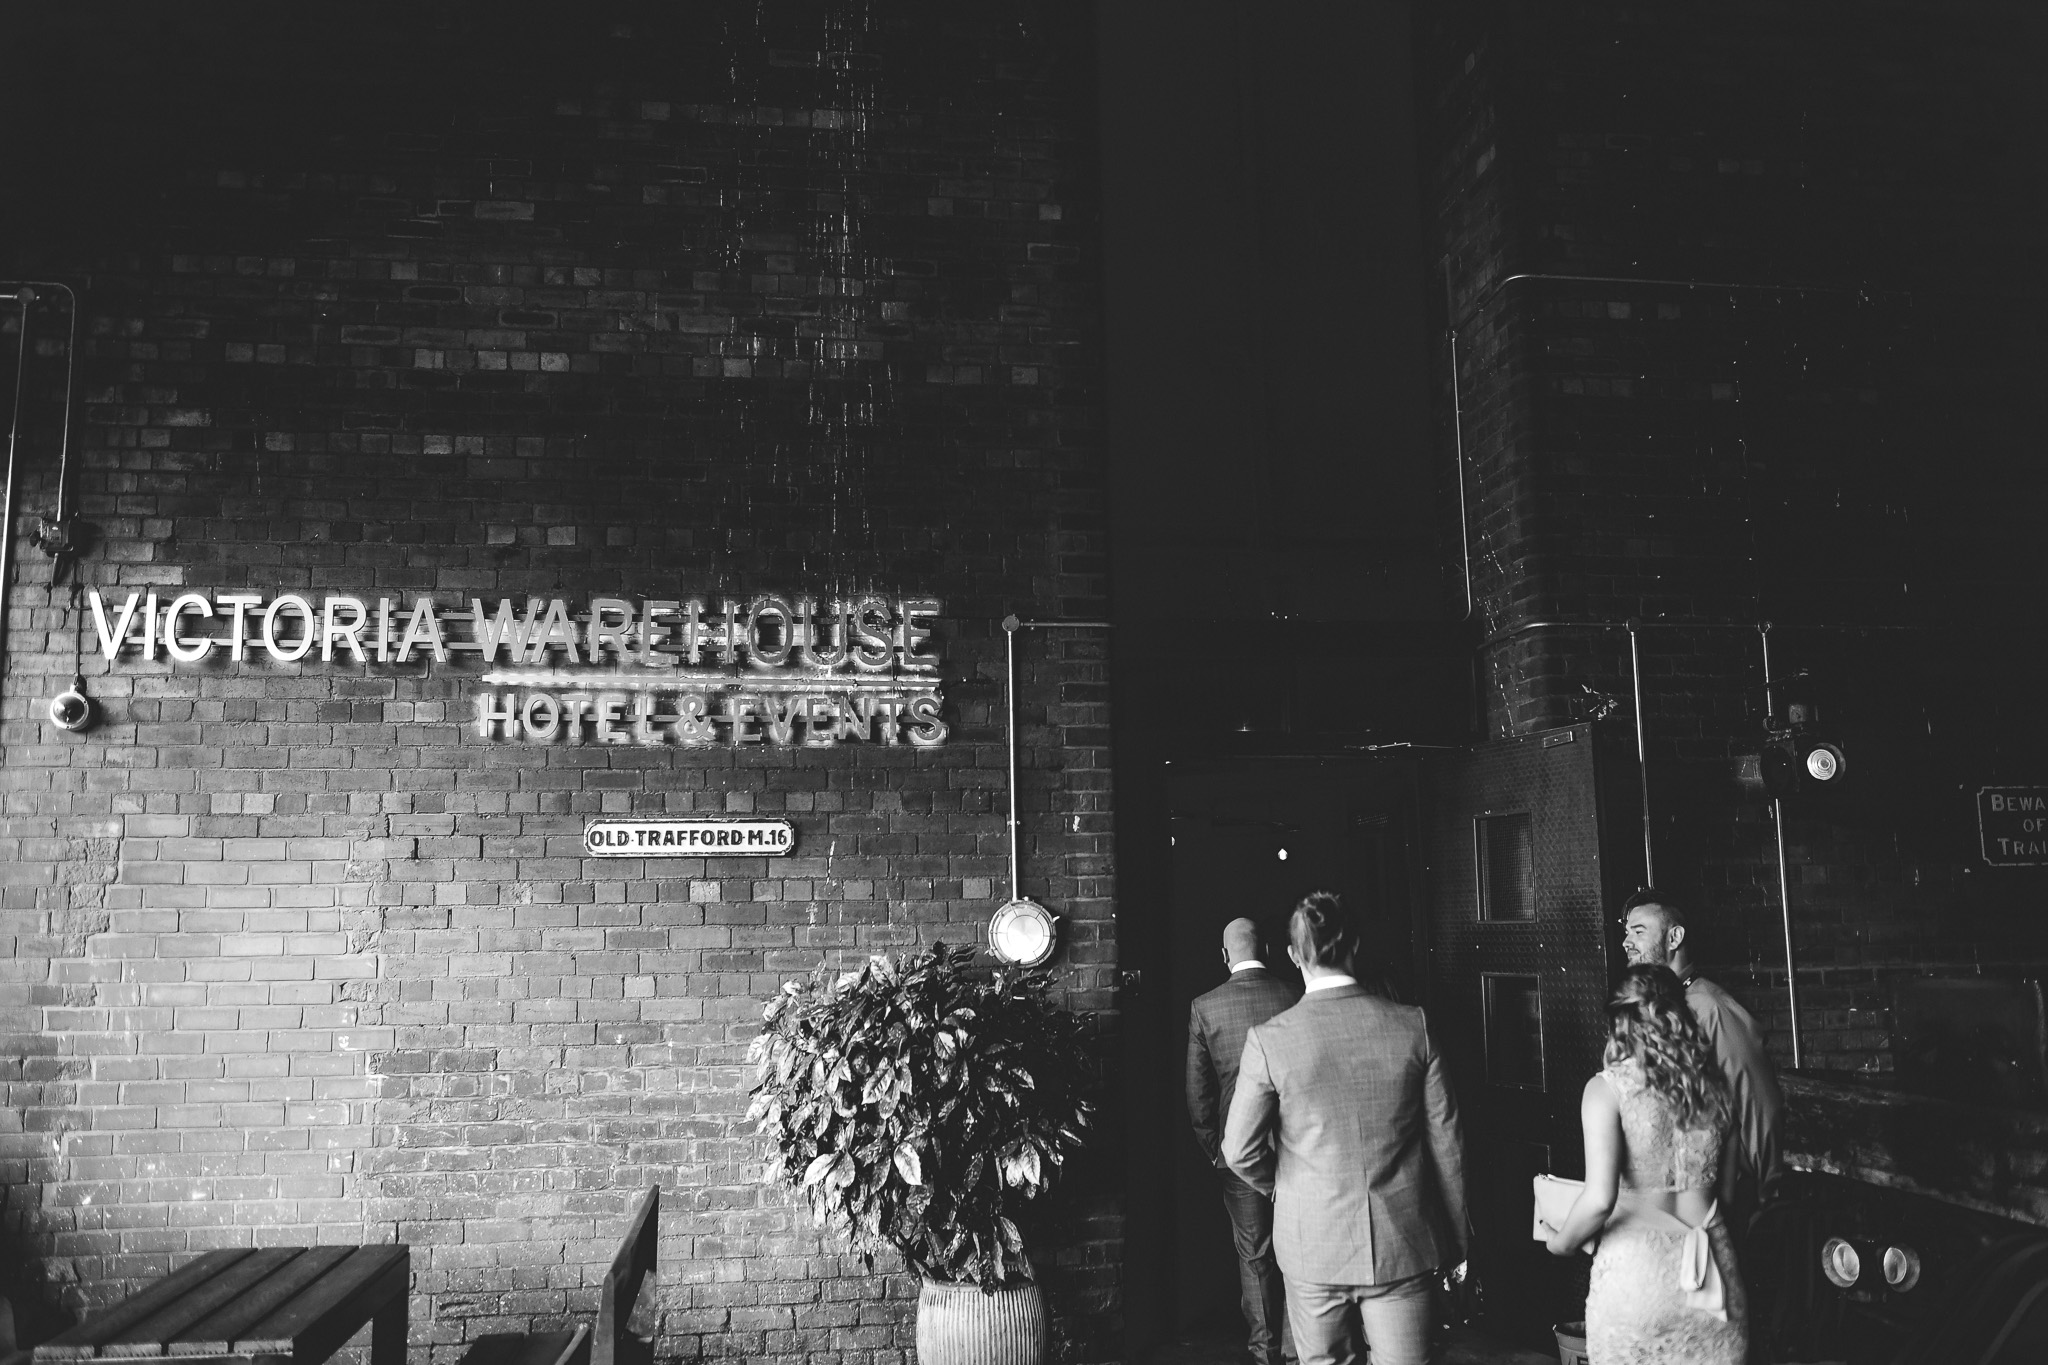 Guests arriving at Victoria Warehouse